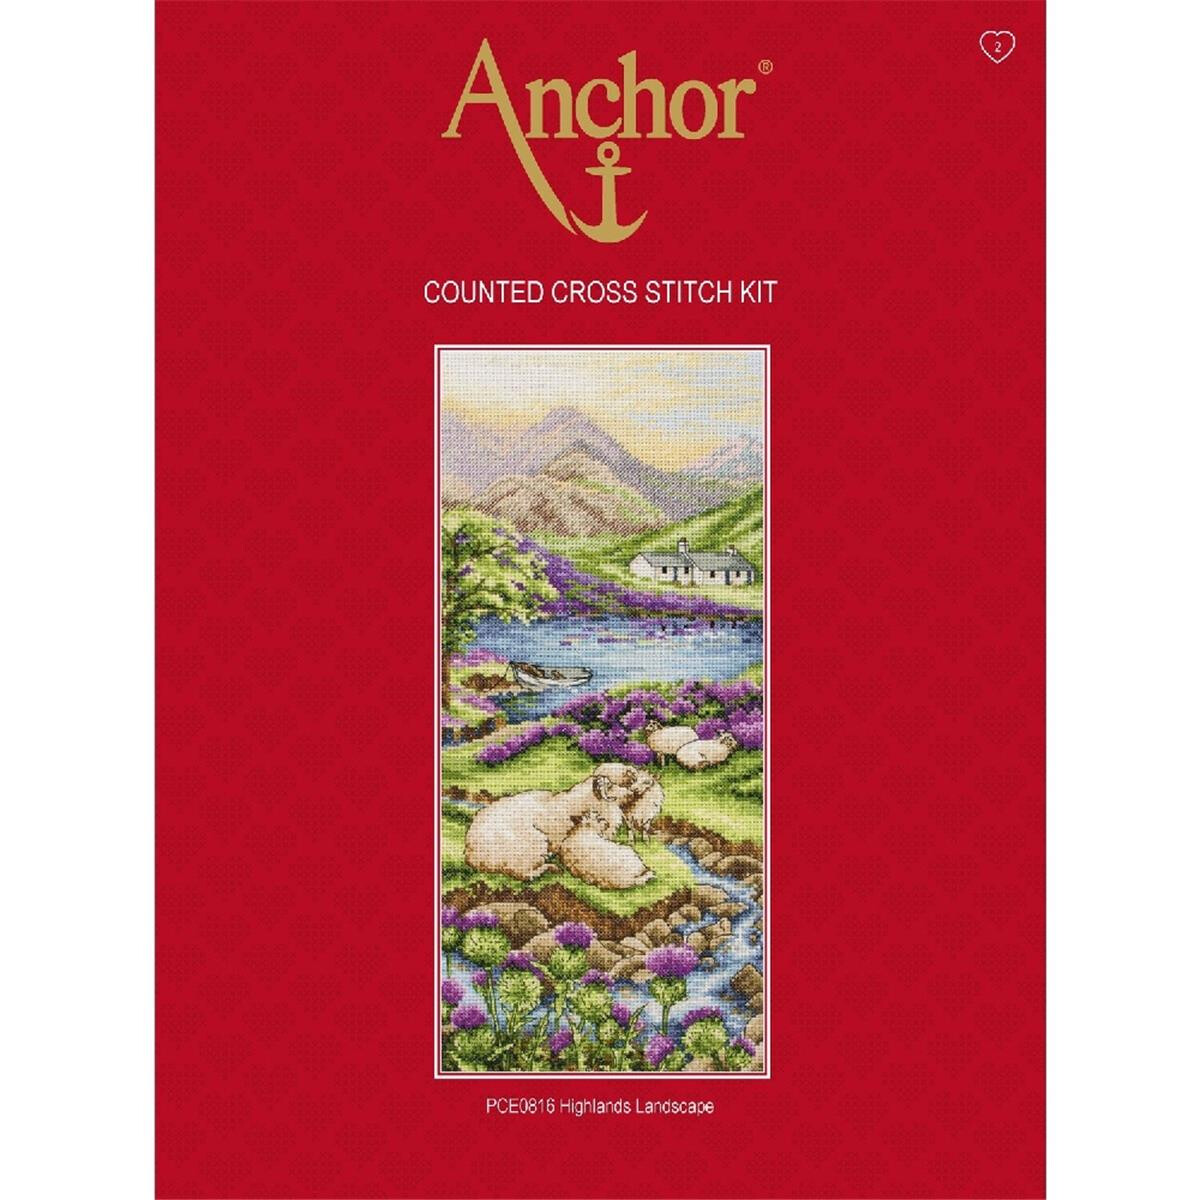 Anchor counted Cross Stitch kit "Highlands...